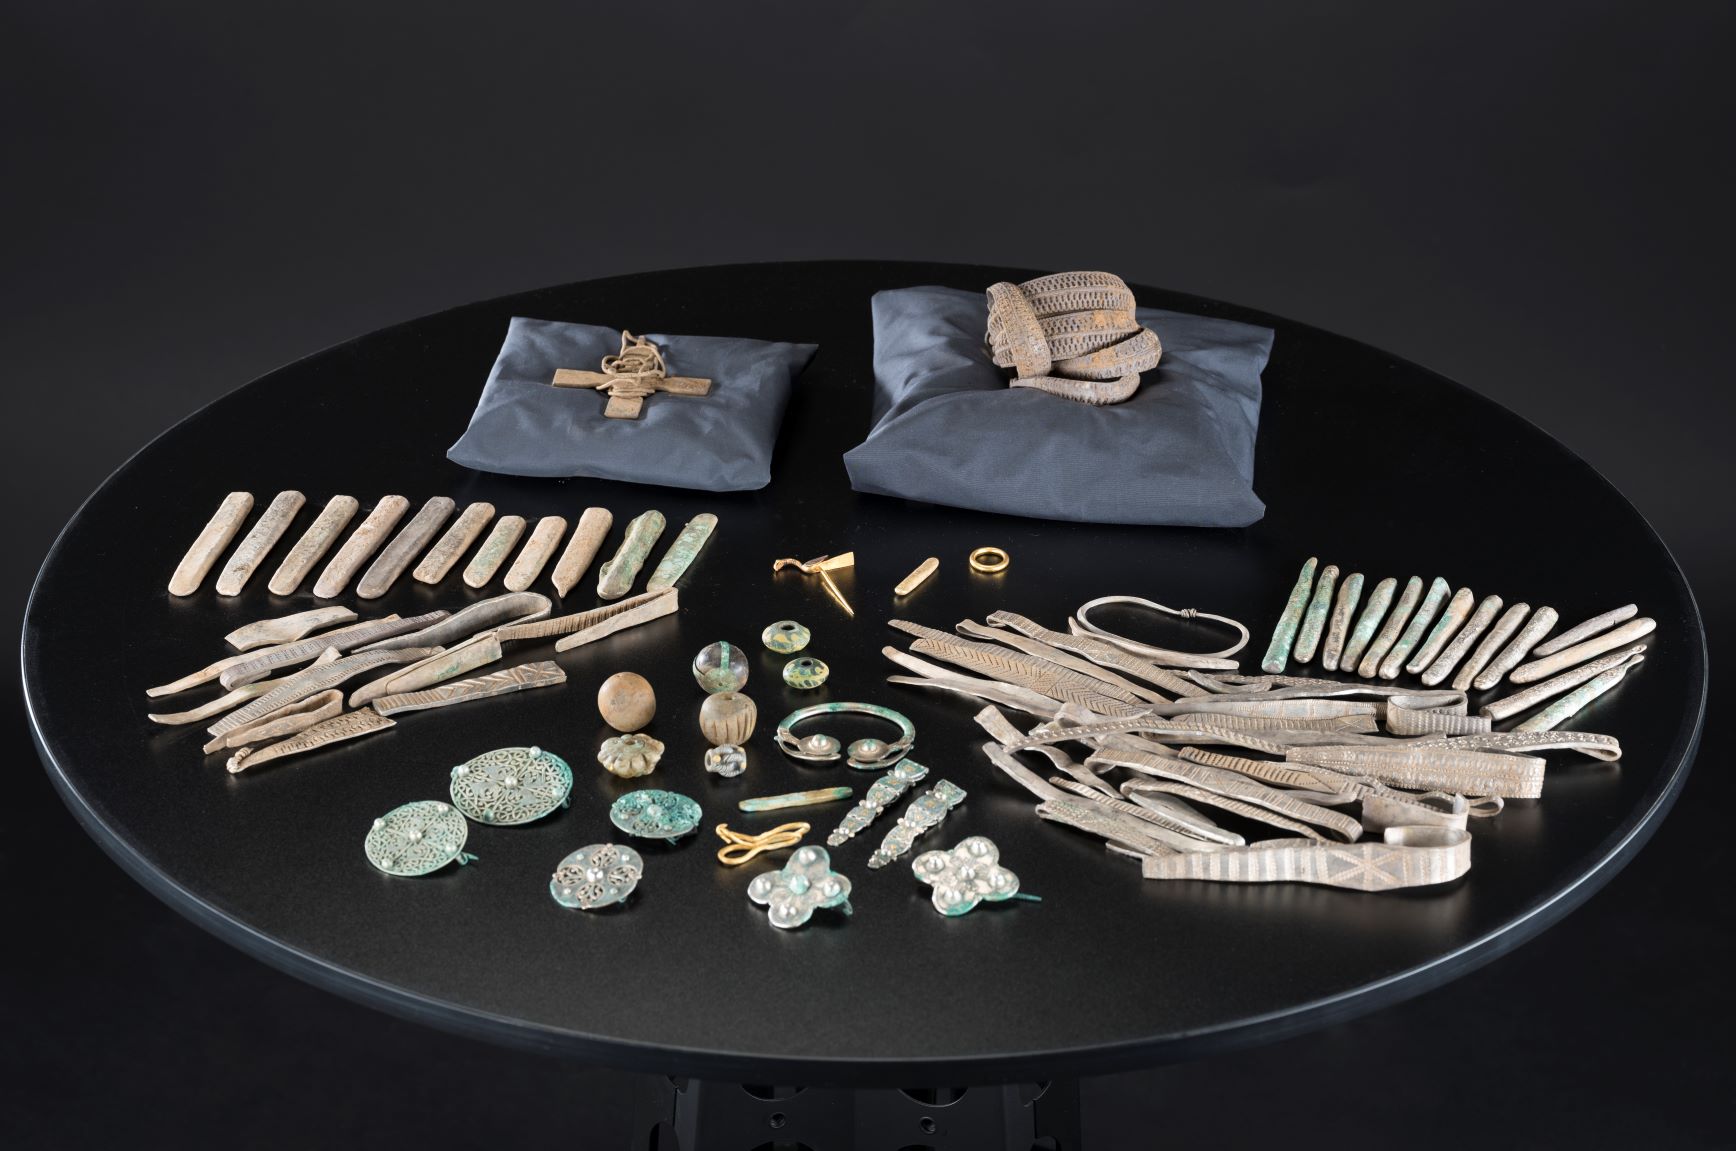 The Galloway Hoard